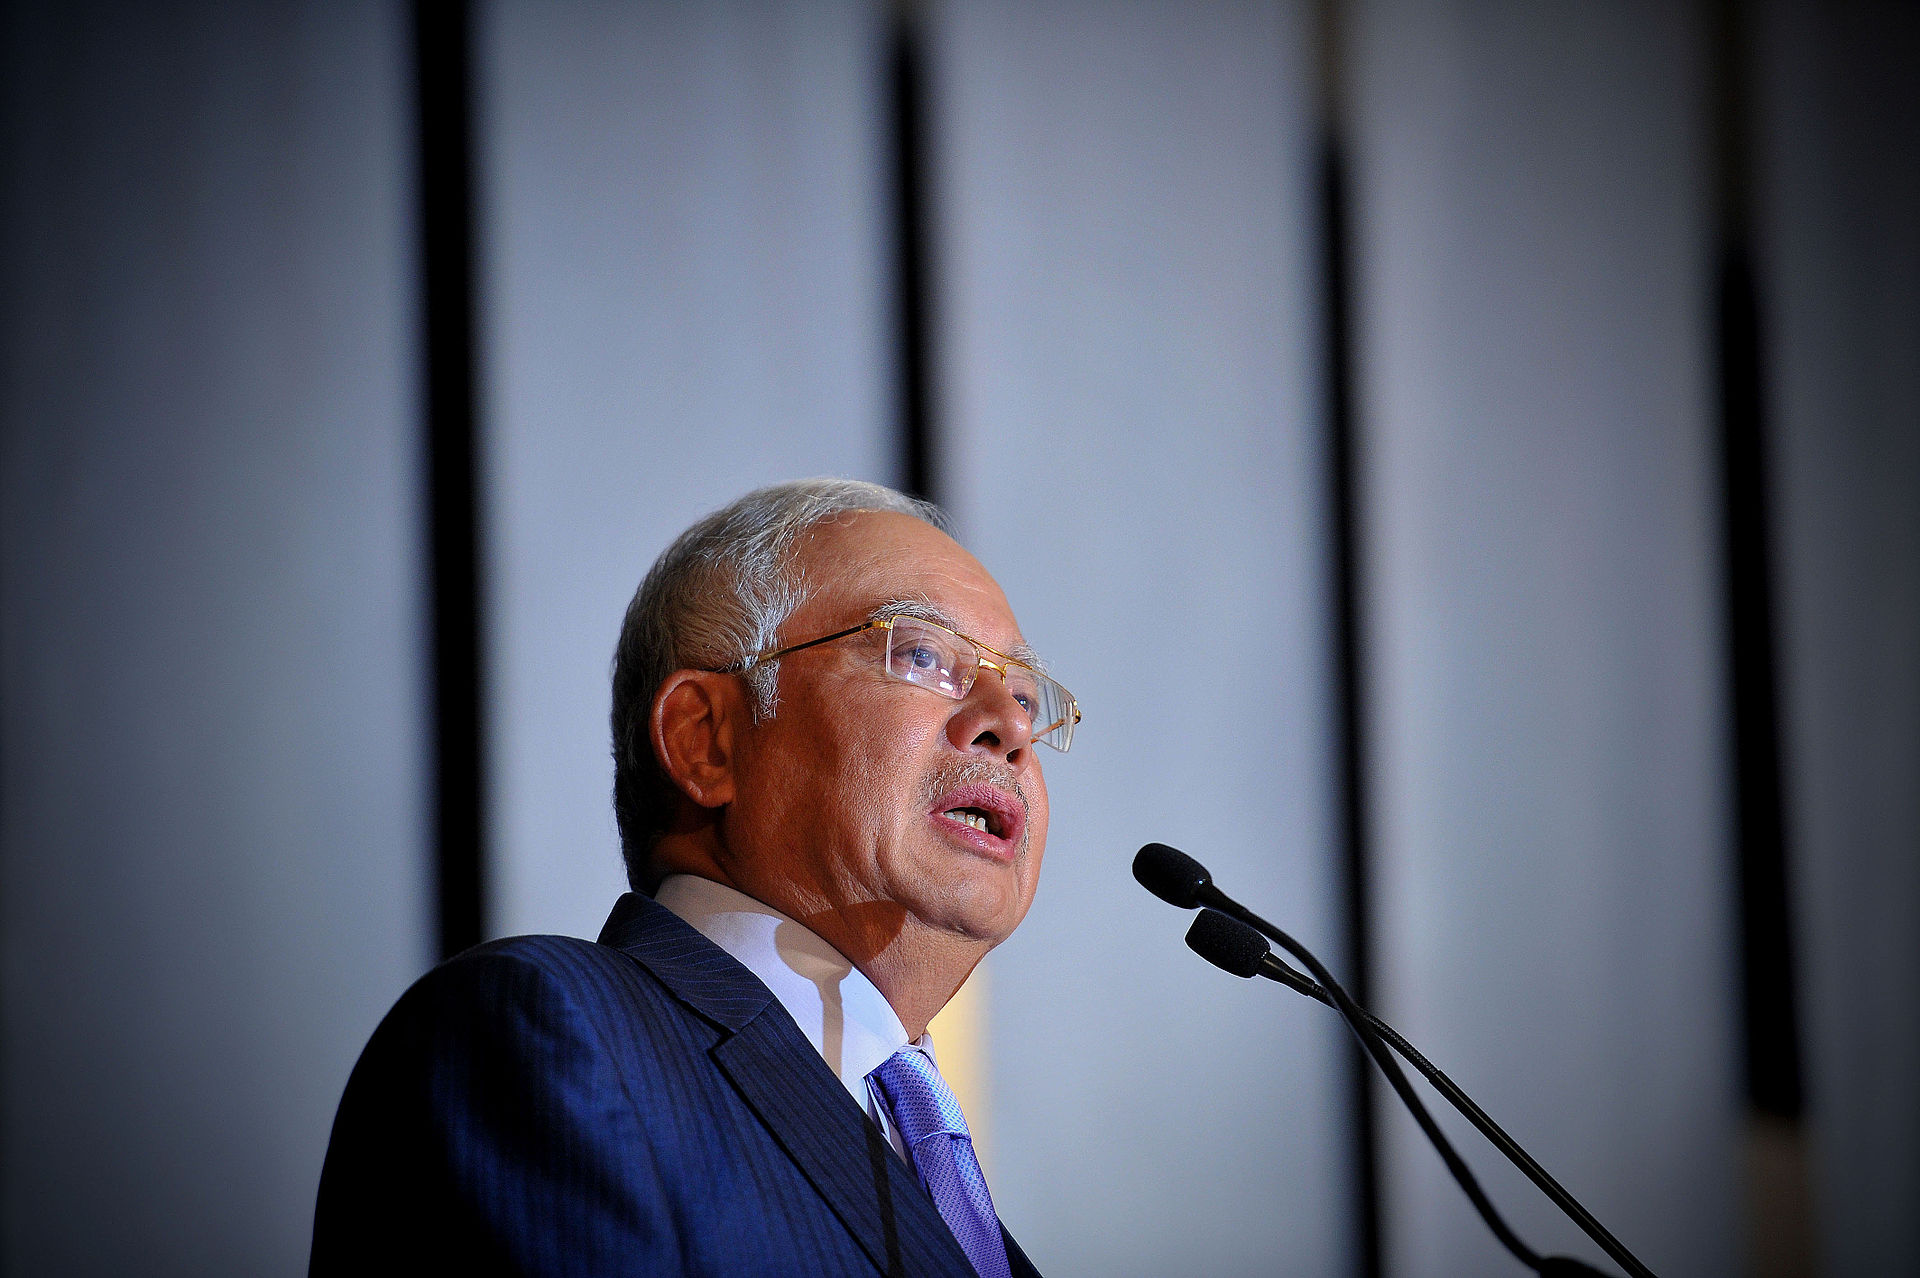 Additional charges leveled against former Malaysia PM